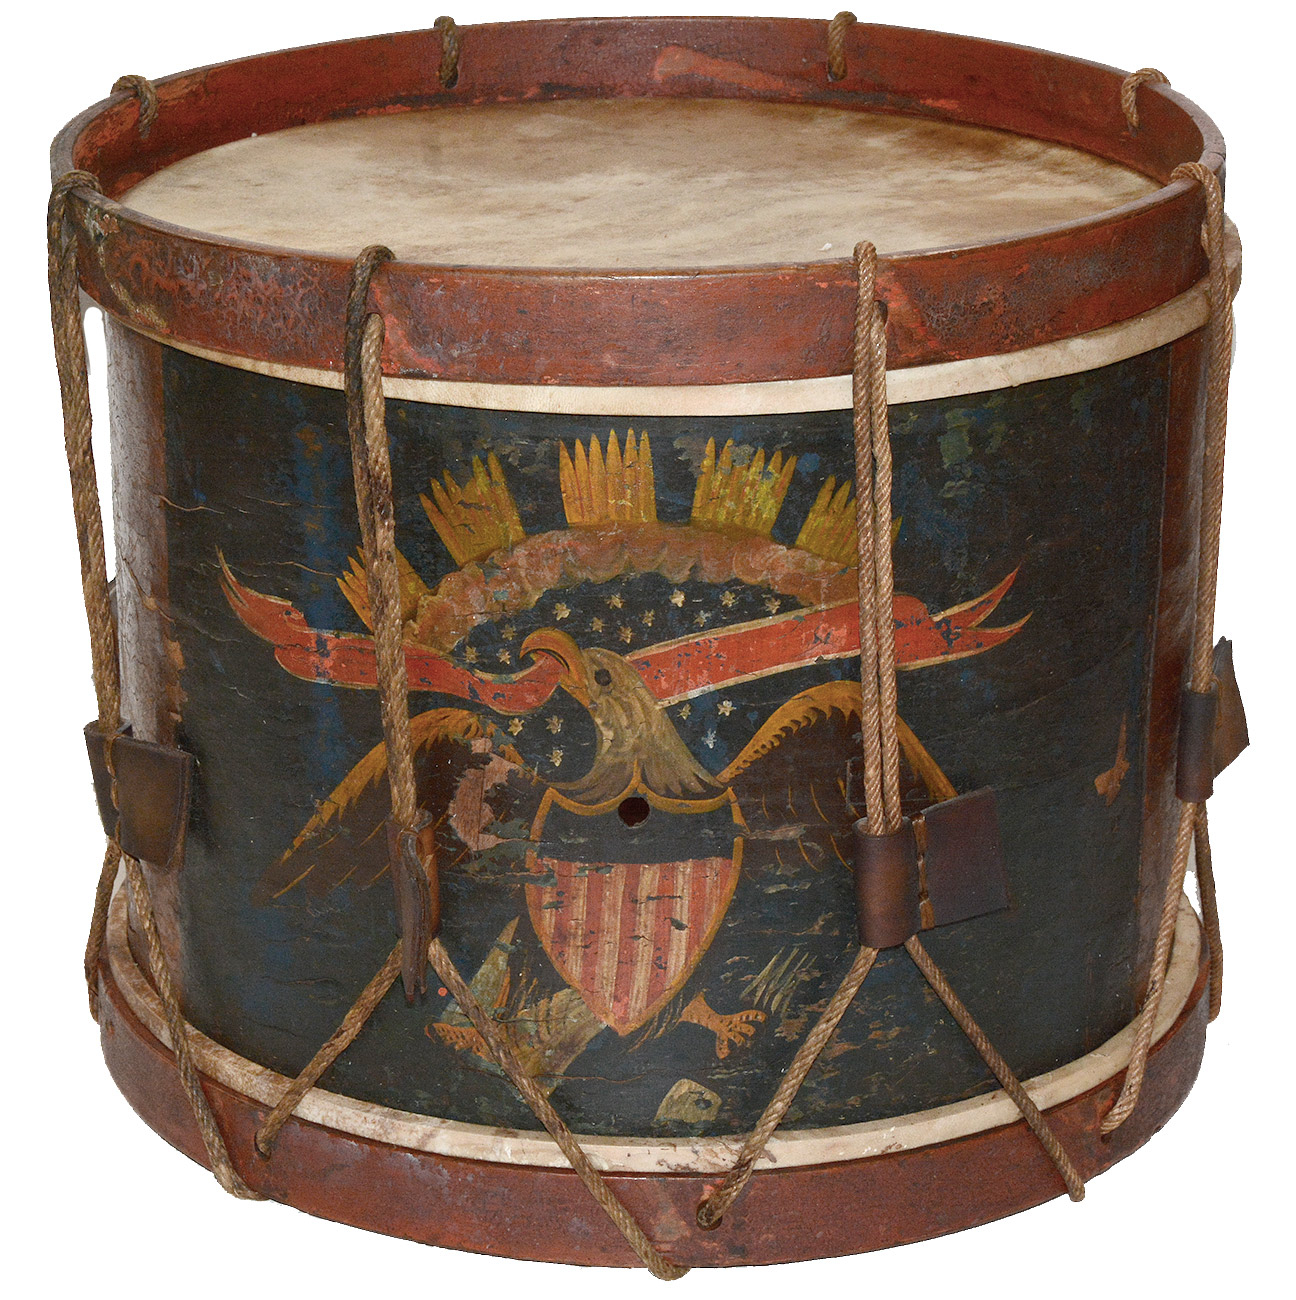 TWO-THIRDS SIZE PAINTED EAGLE DRUM